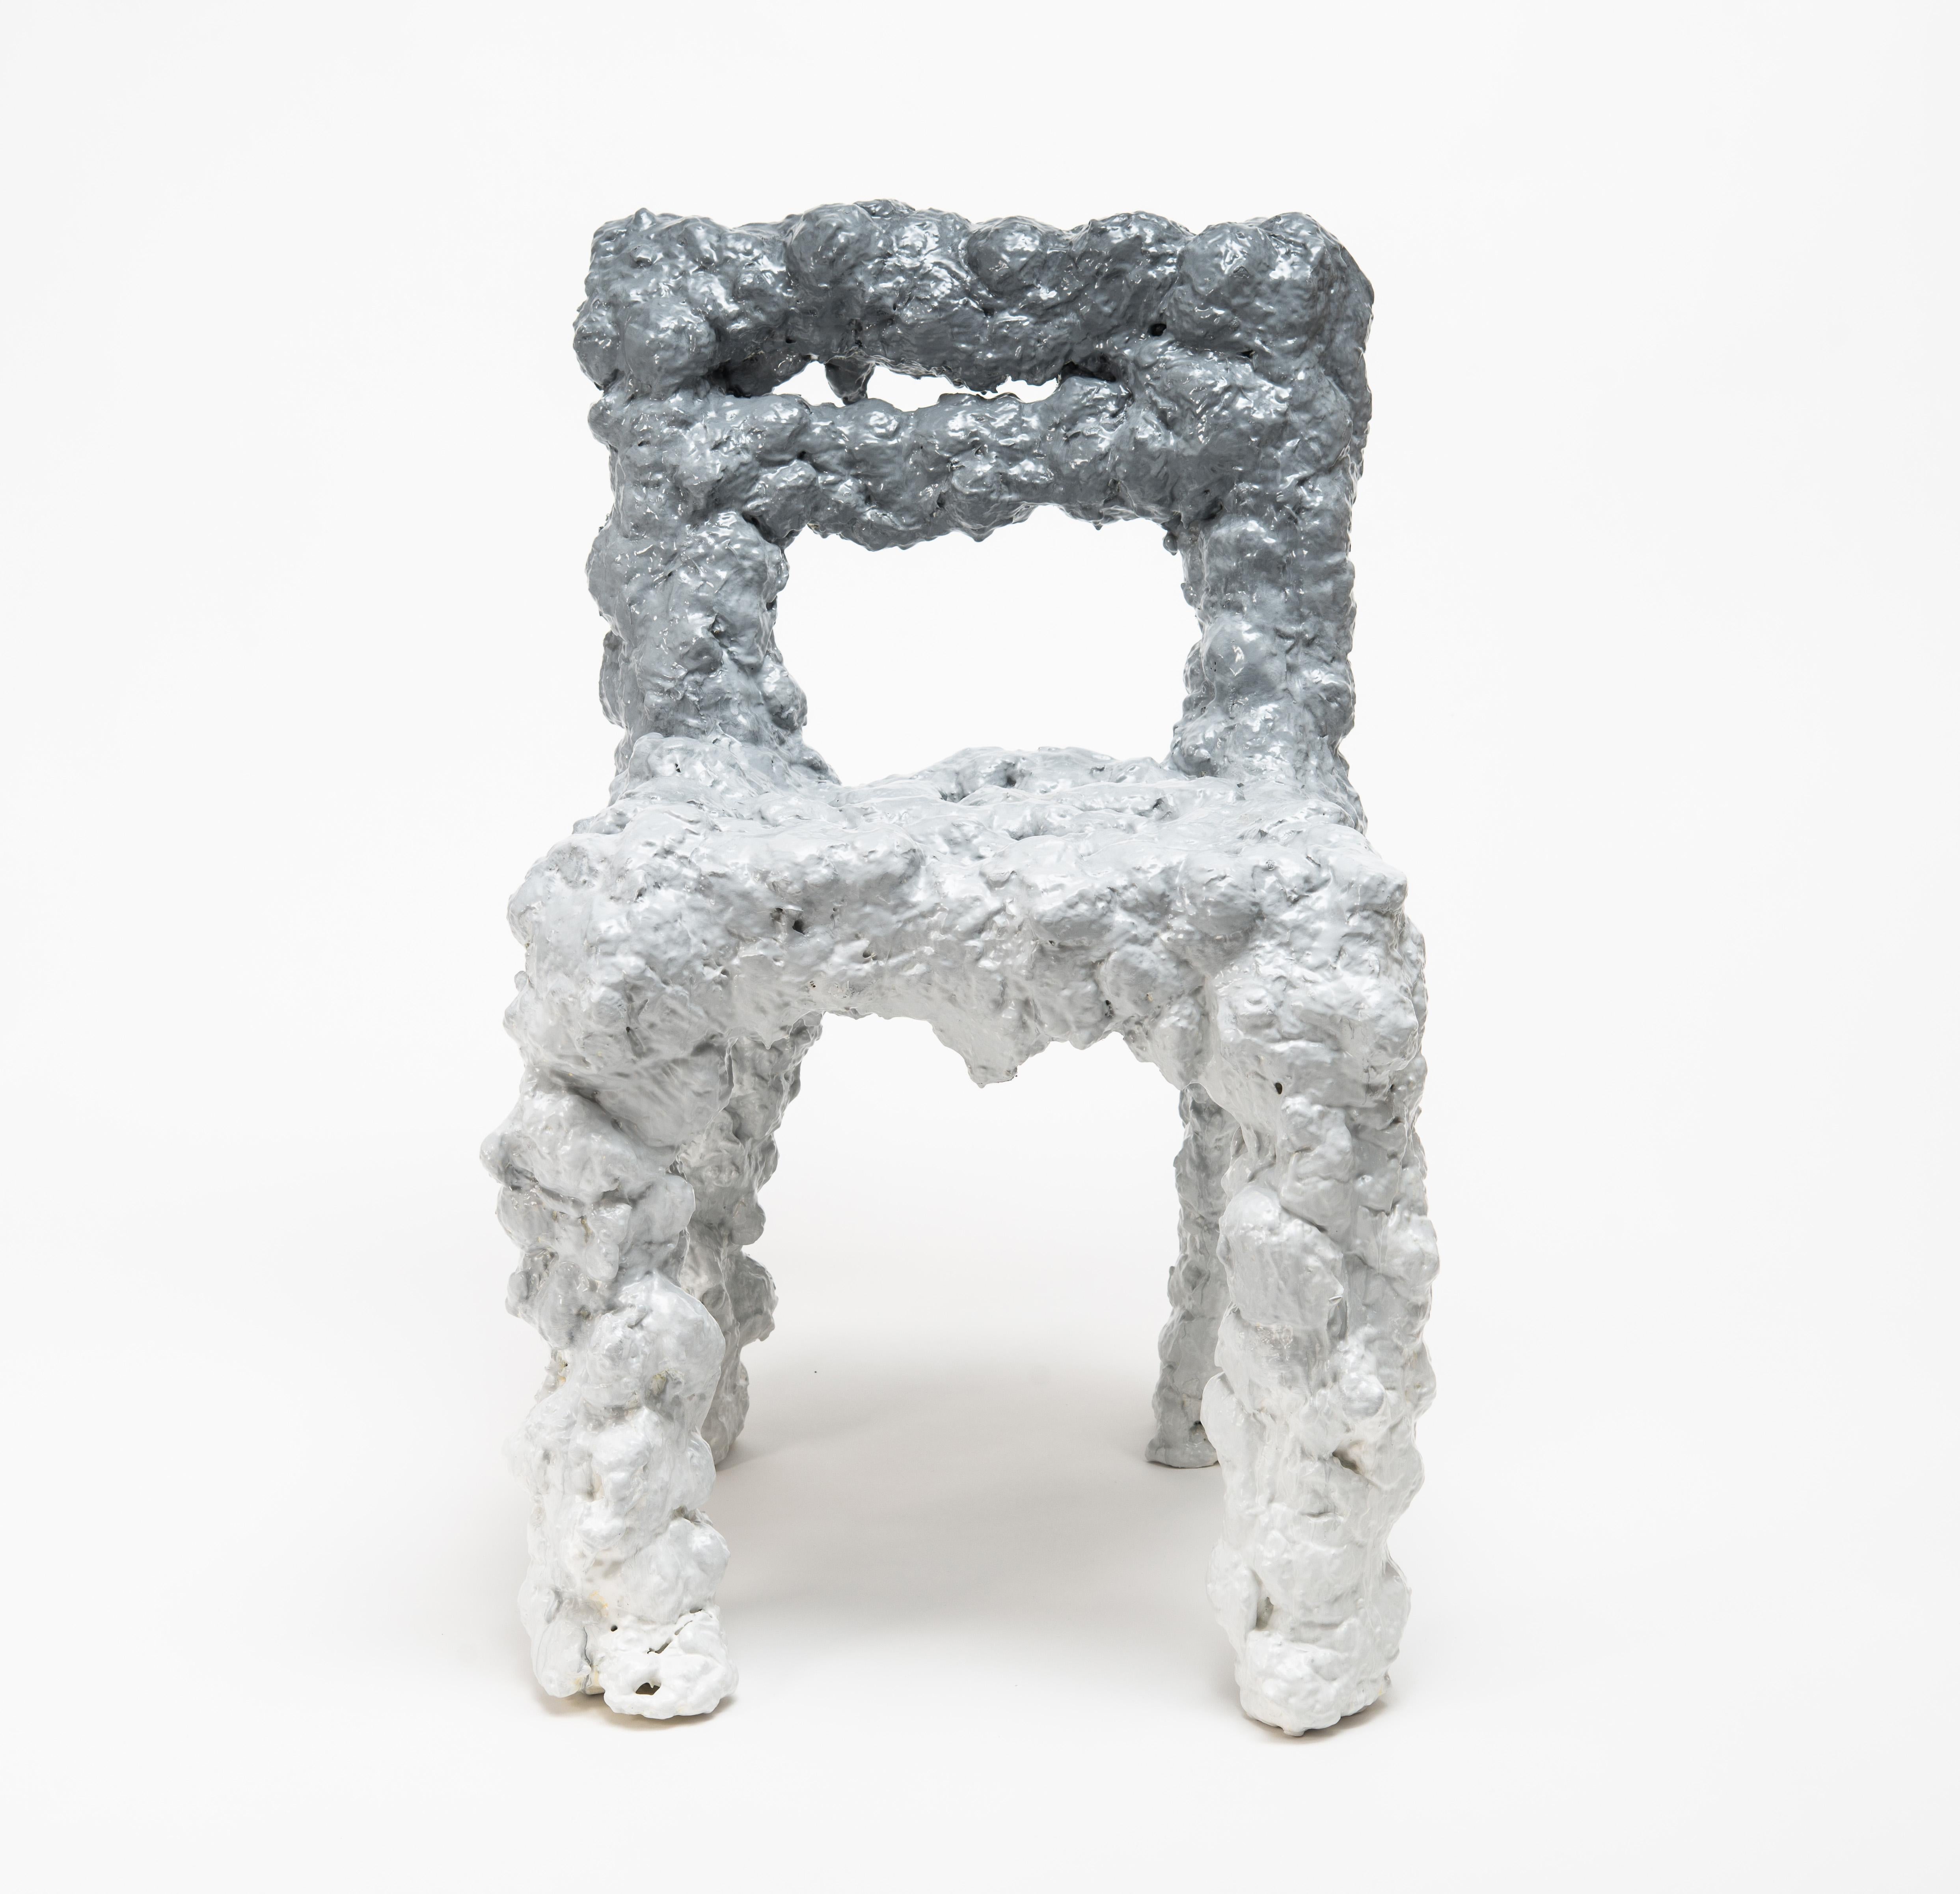 The idea of the Cloud Chair is to use the natural expansion of a polyurethane foam used in construction for insulation. The concept is to create a cloud or steam like geometry by the foam process directly applied out of the can.
Therefore, the